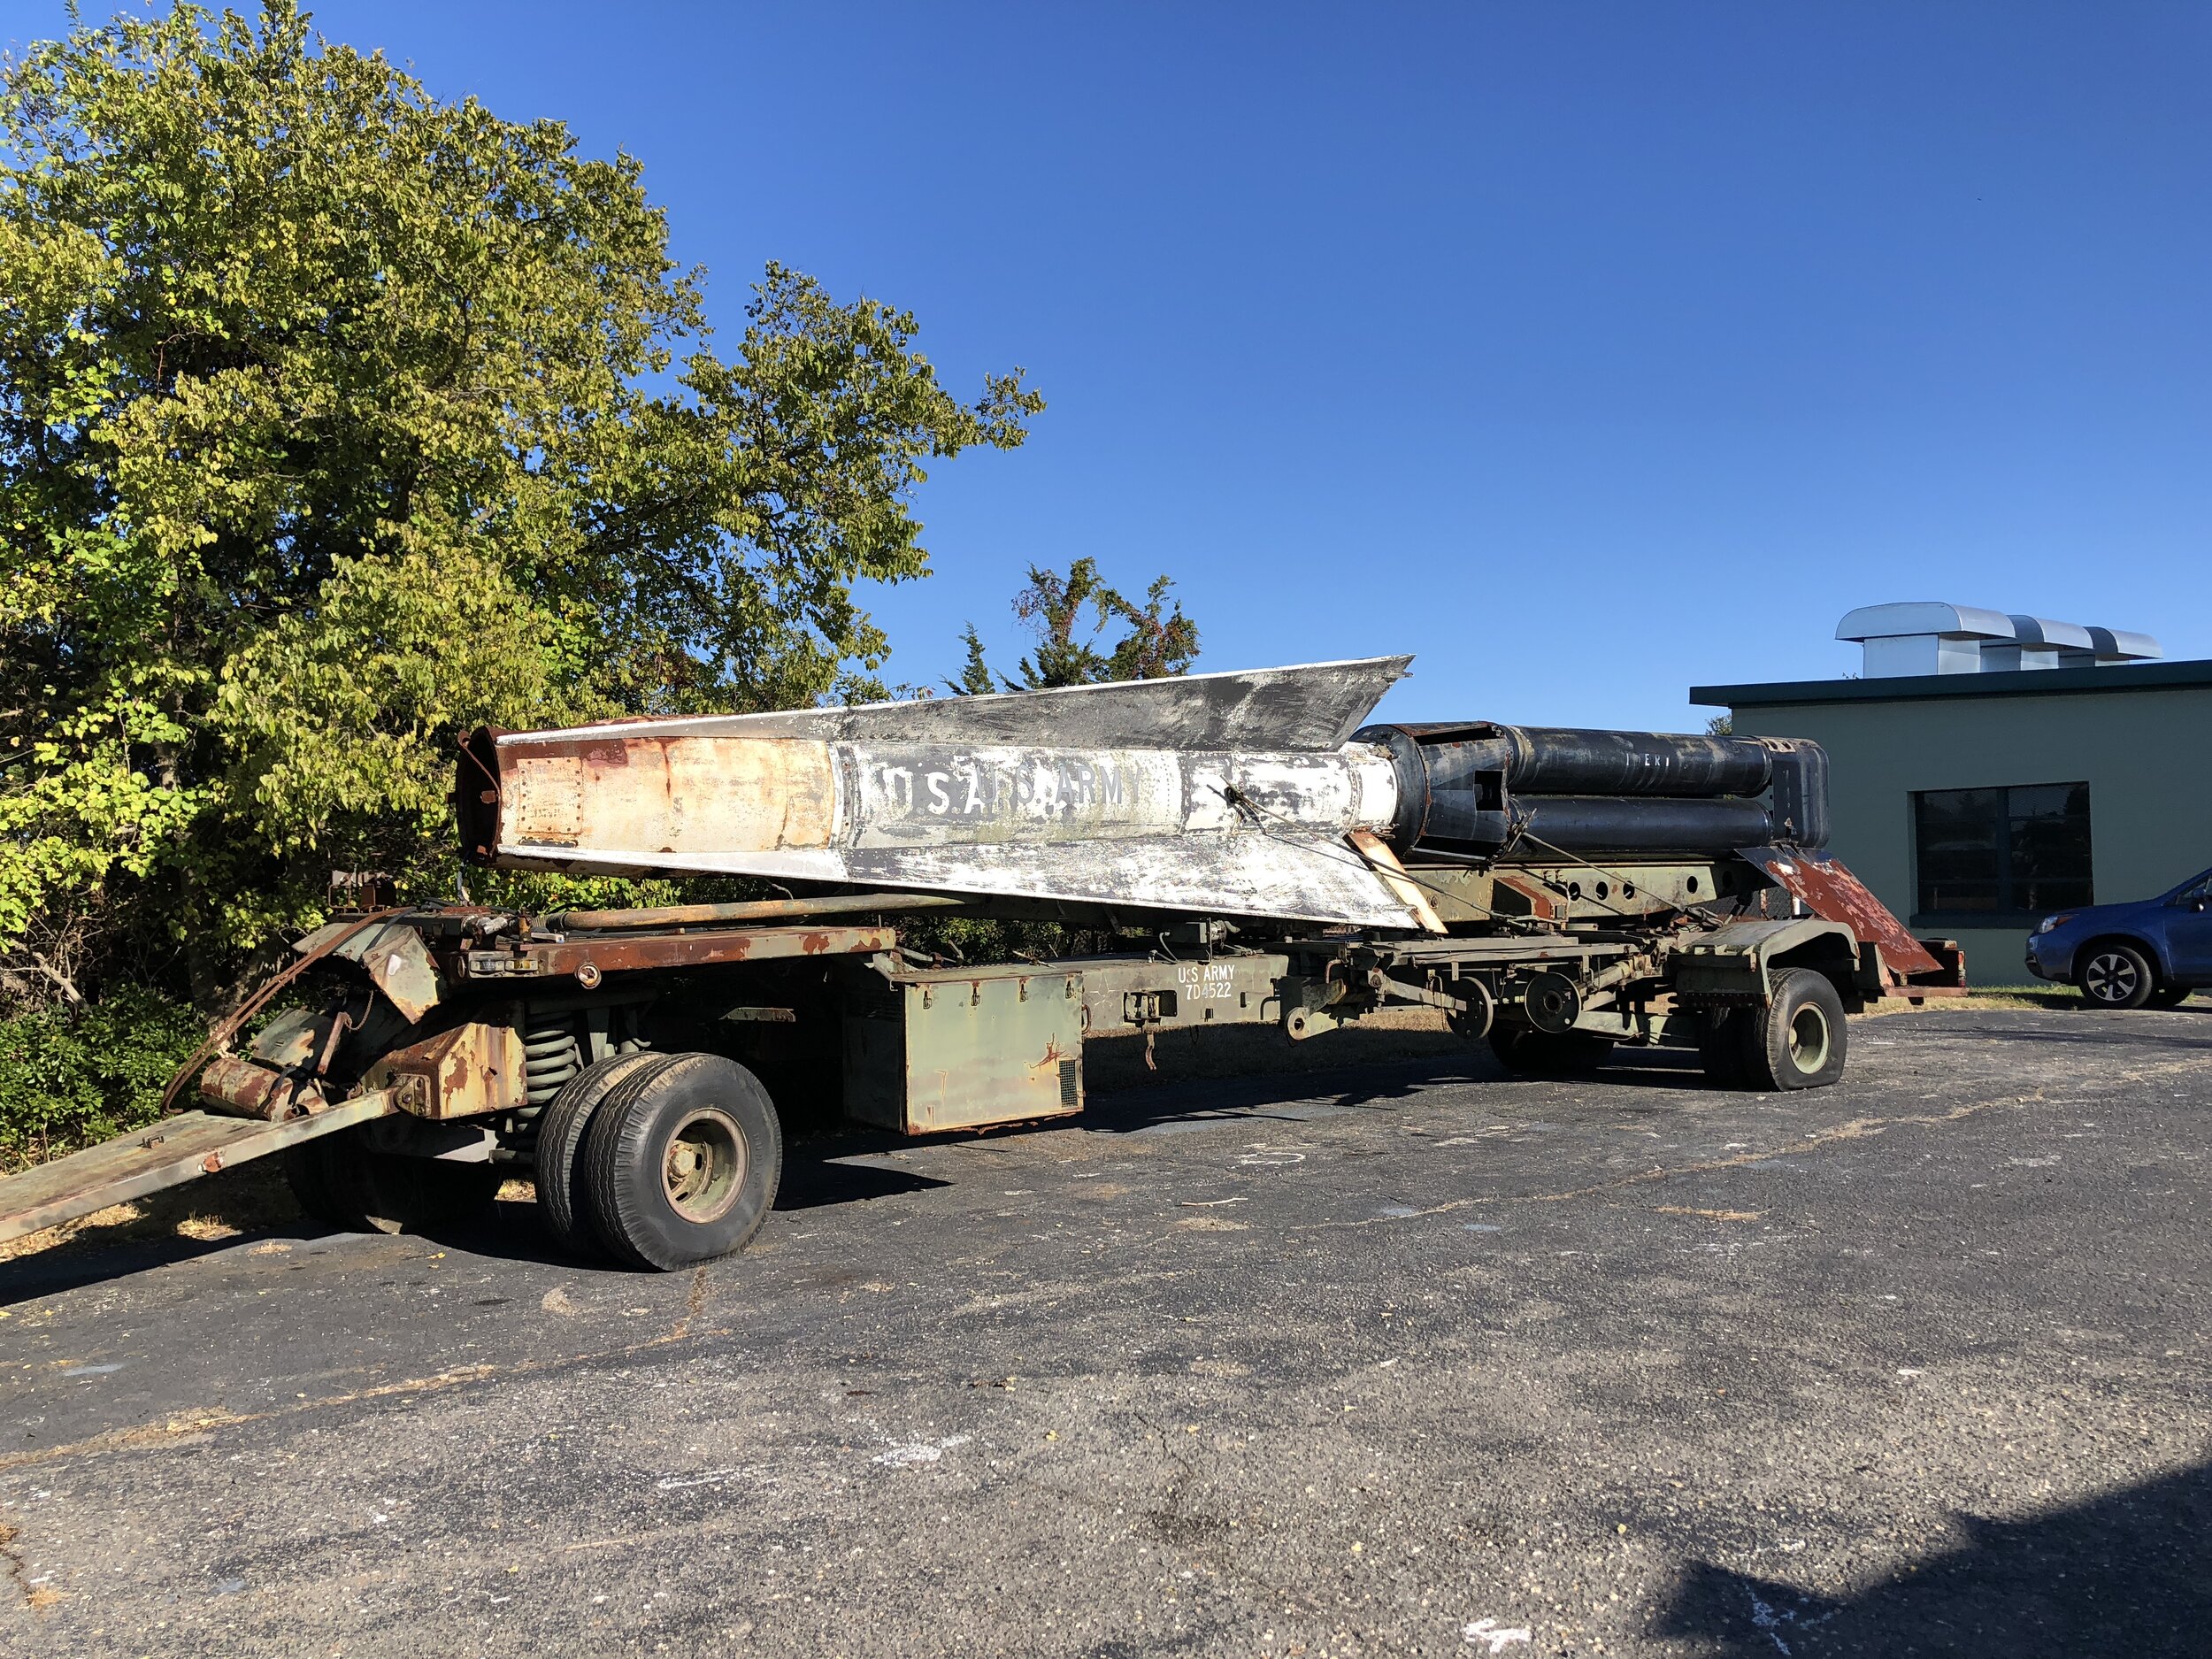 New Nike Missile Now on Display at Sandy Hook — The Sandy Hook